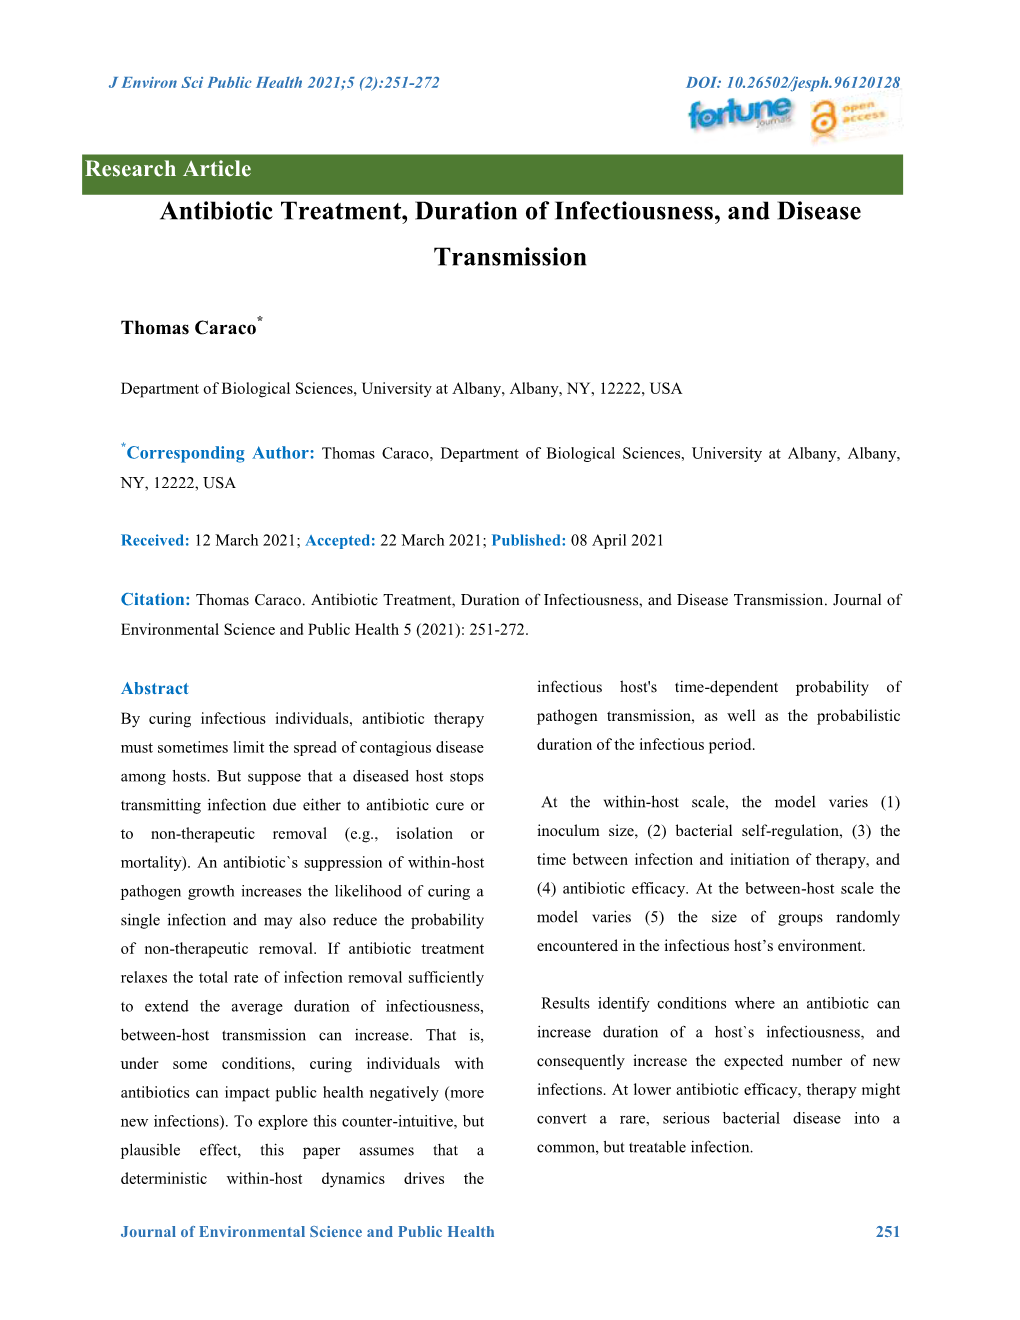 Antibiotic Treatment, Duration of Infectiousness, and Disease Transmission